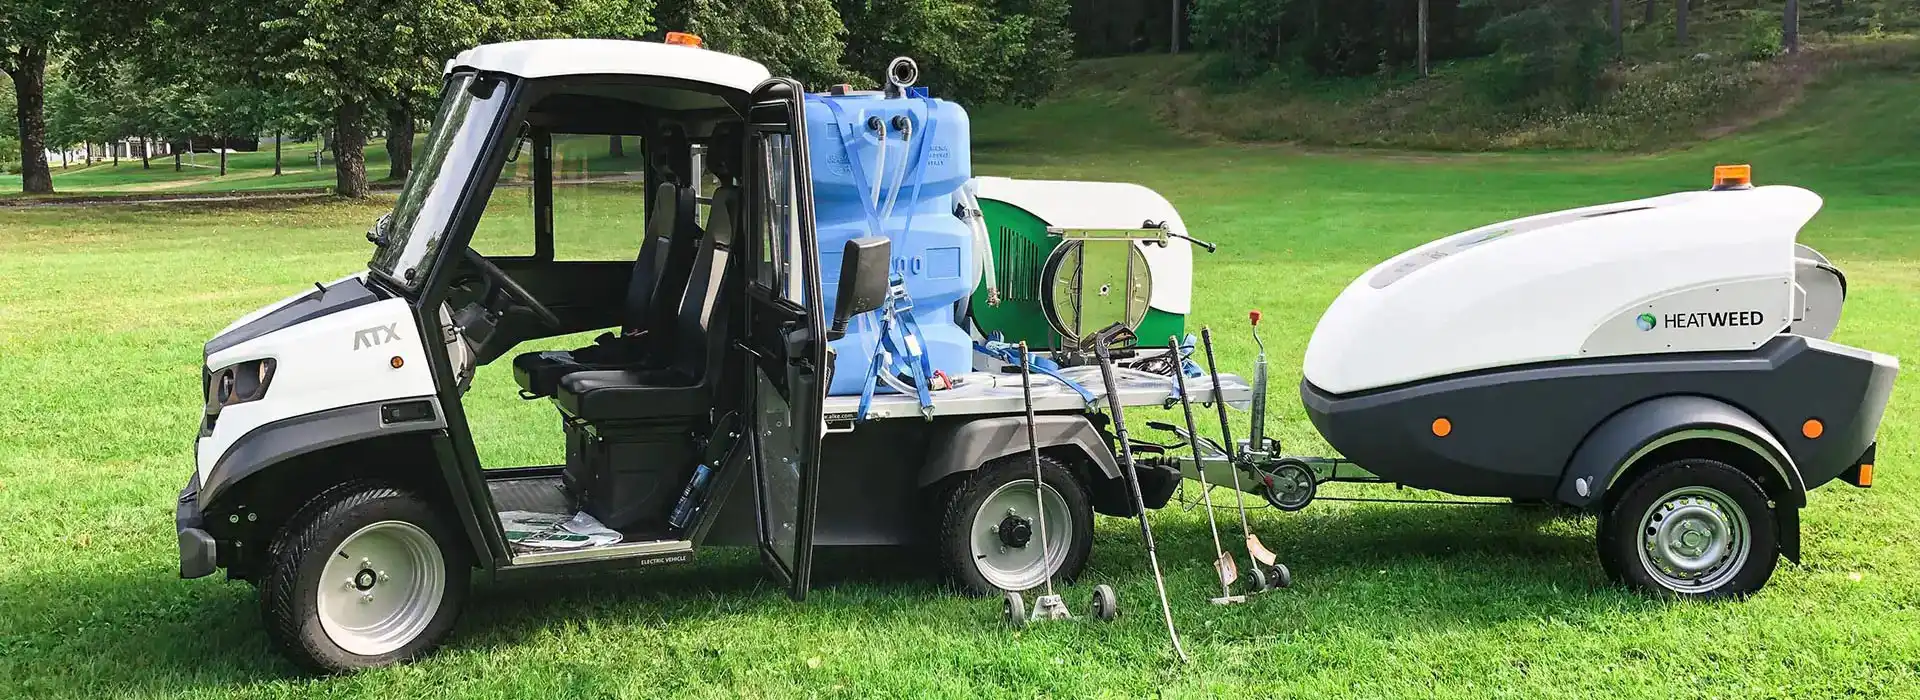 Electric golf buggy Alkè - As solid as an off-road vehicle